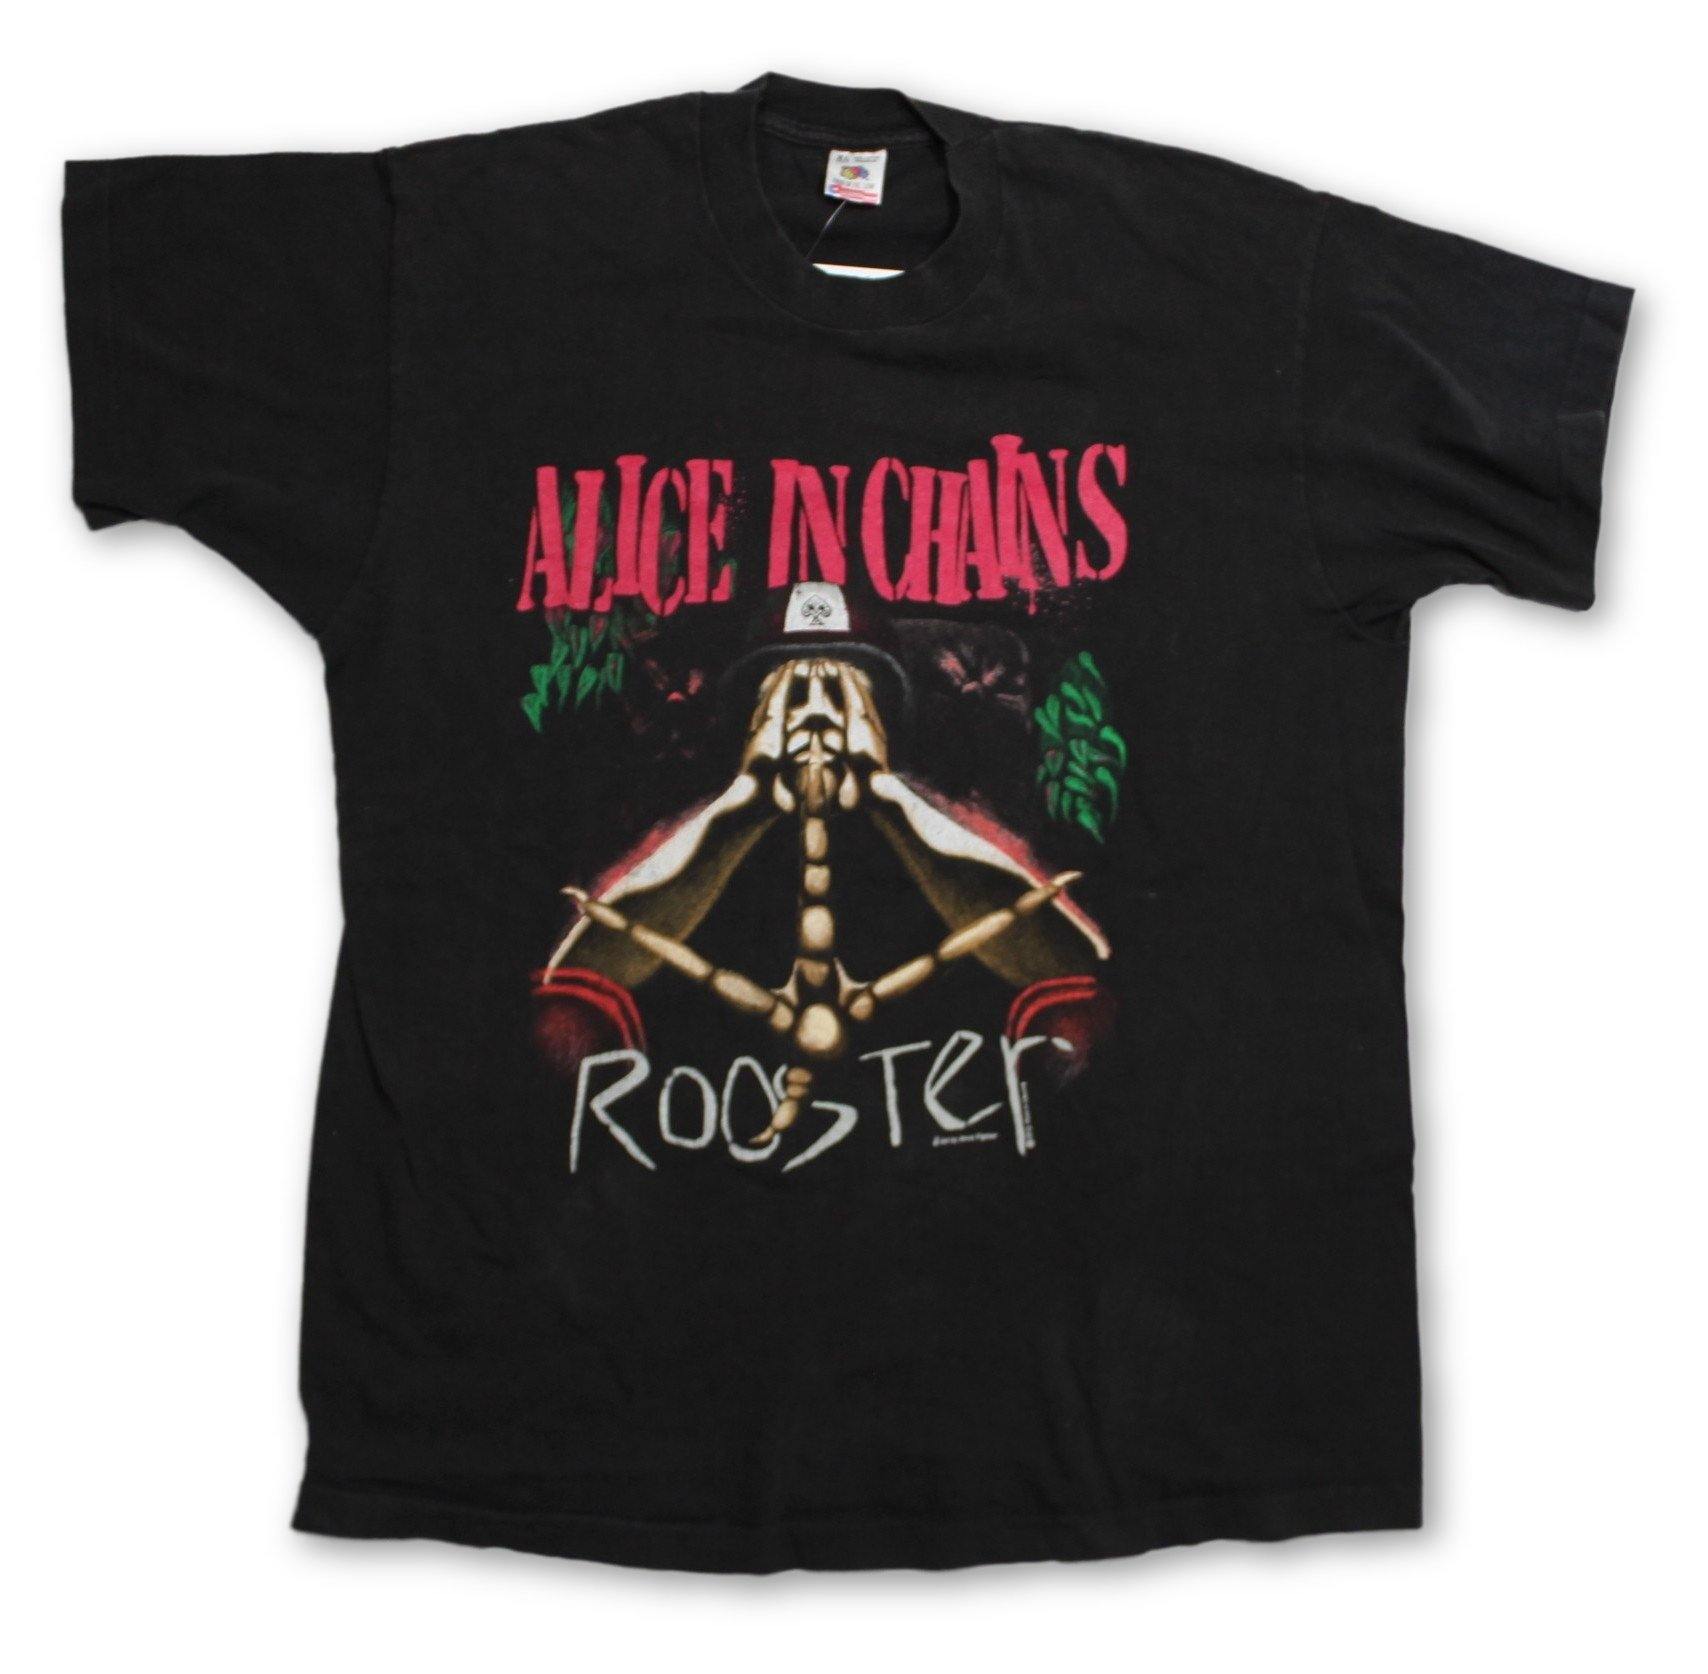 Vintage Alice in Chains "Rooster" T-Shirt - jointcustodydc